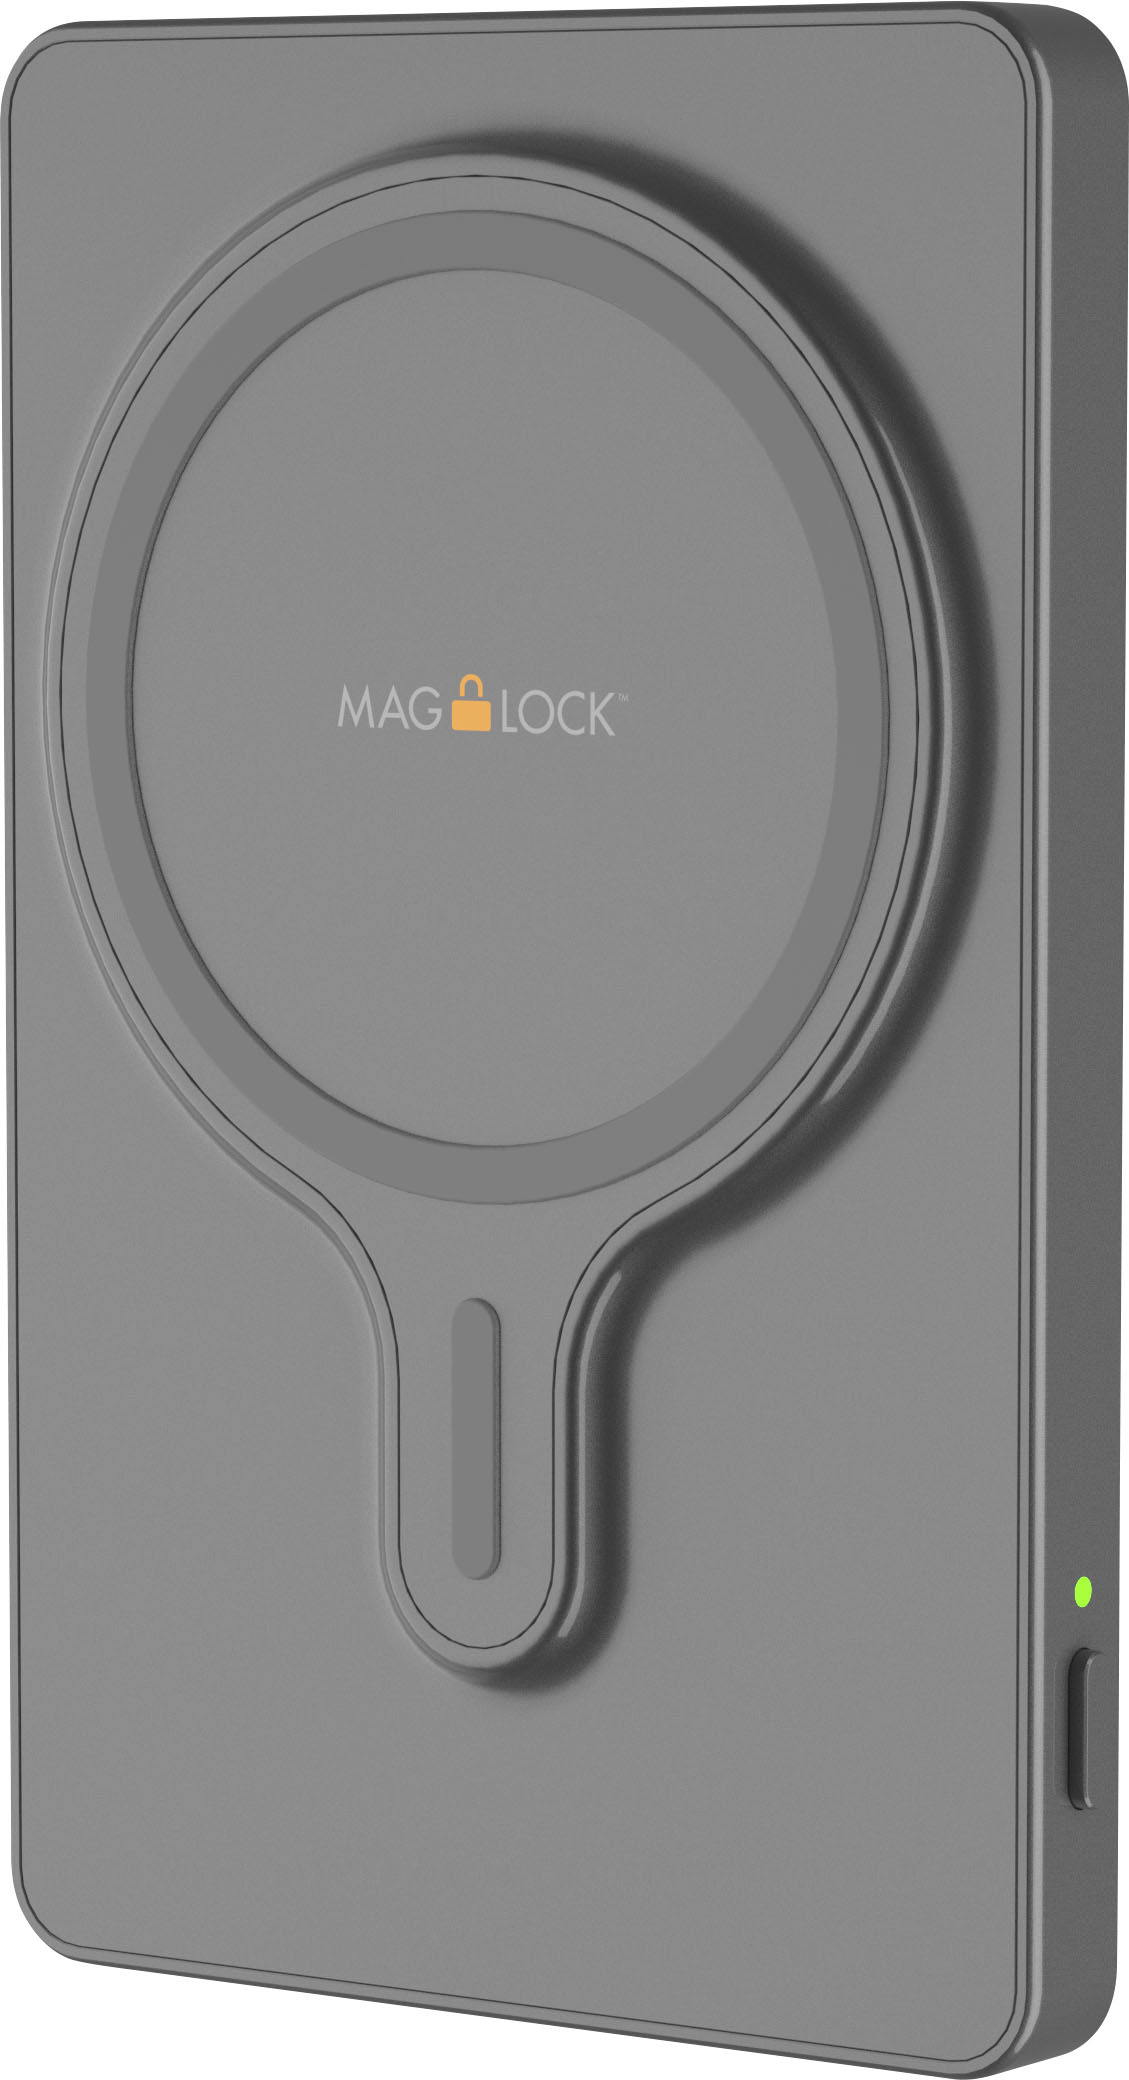 myCharge - MagLock 3000mAh Internal Battery Wireless Portable Charger - Graphite